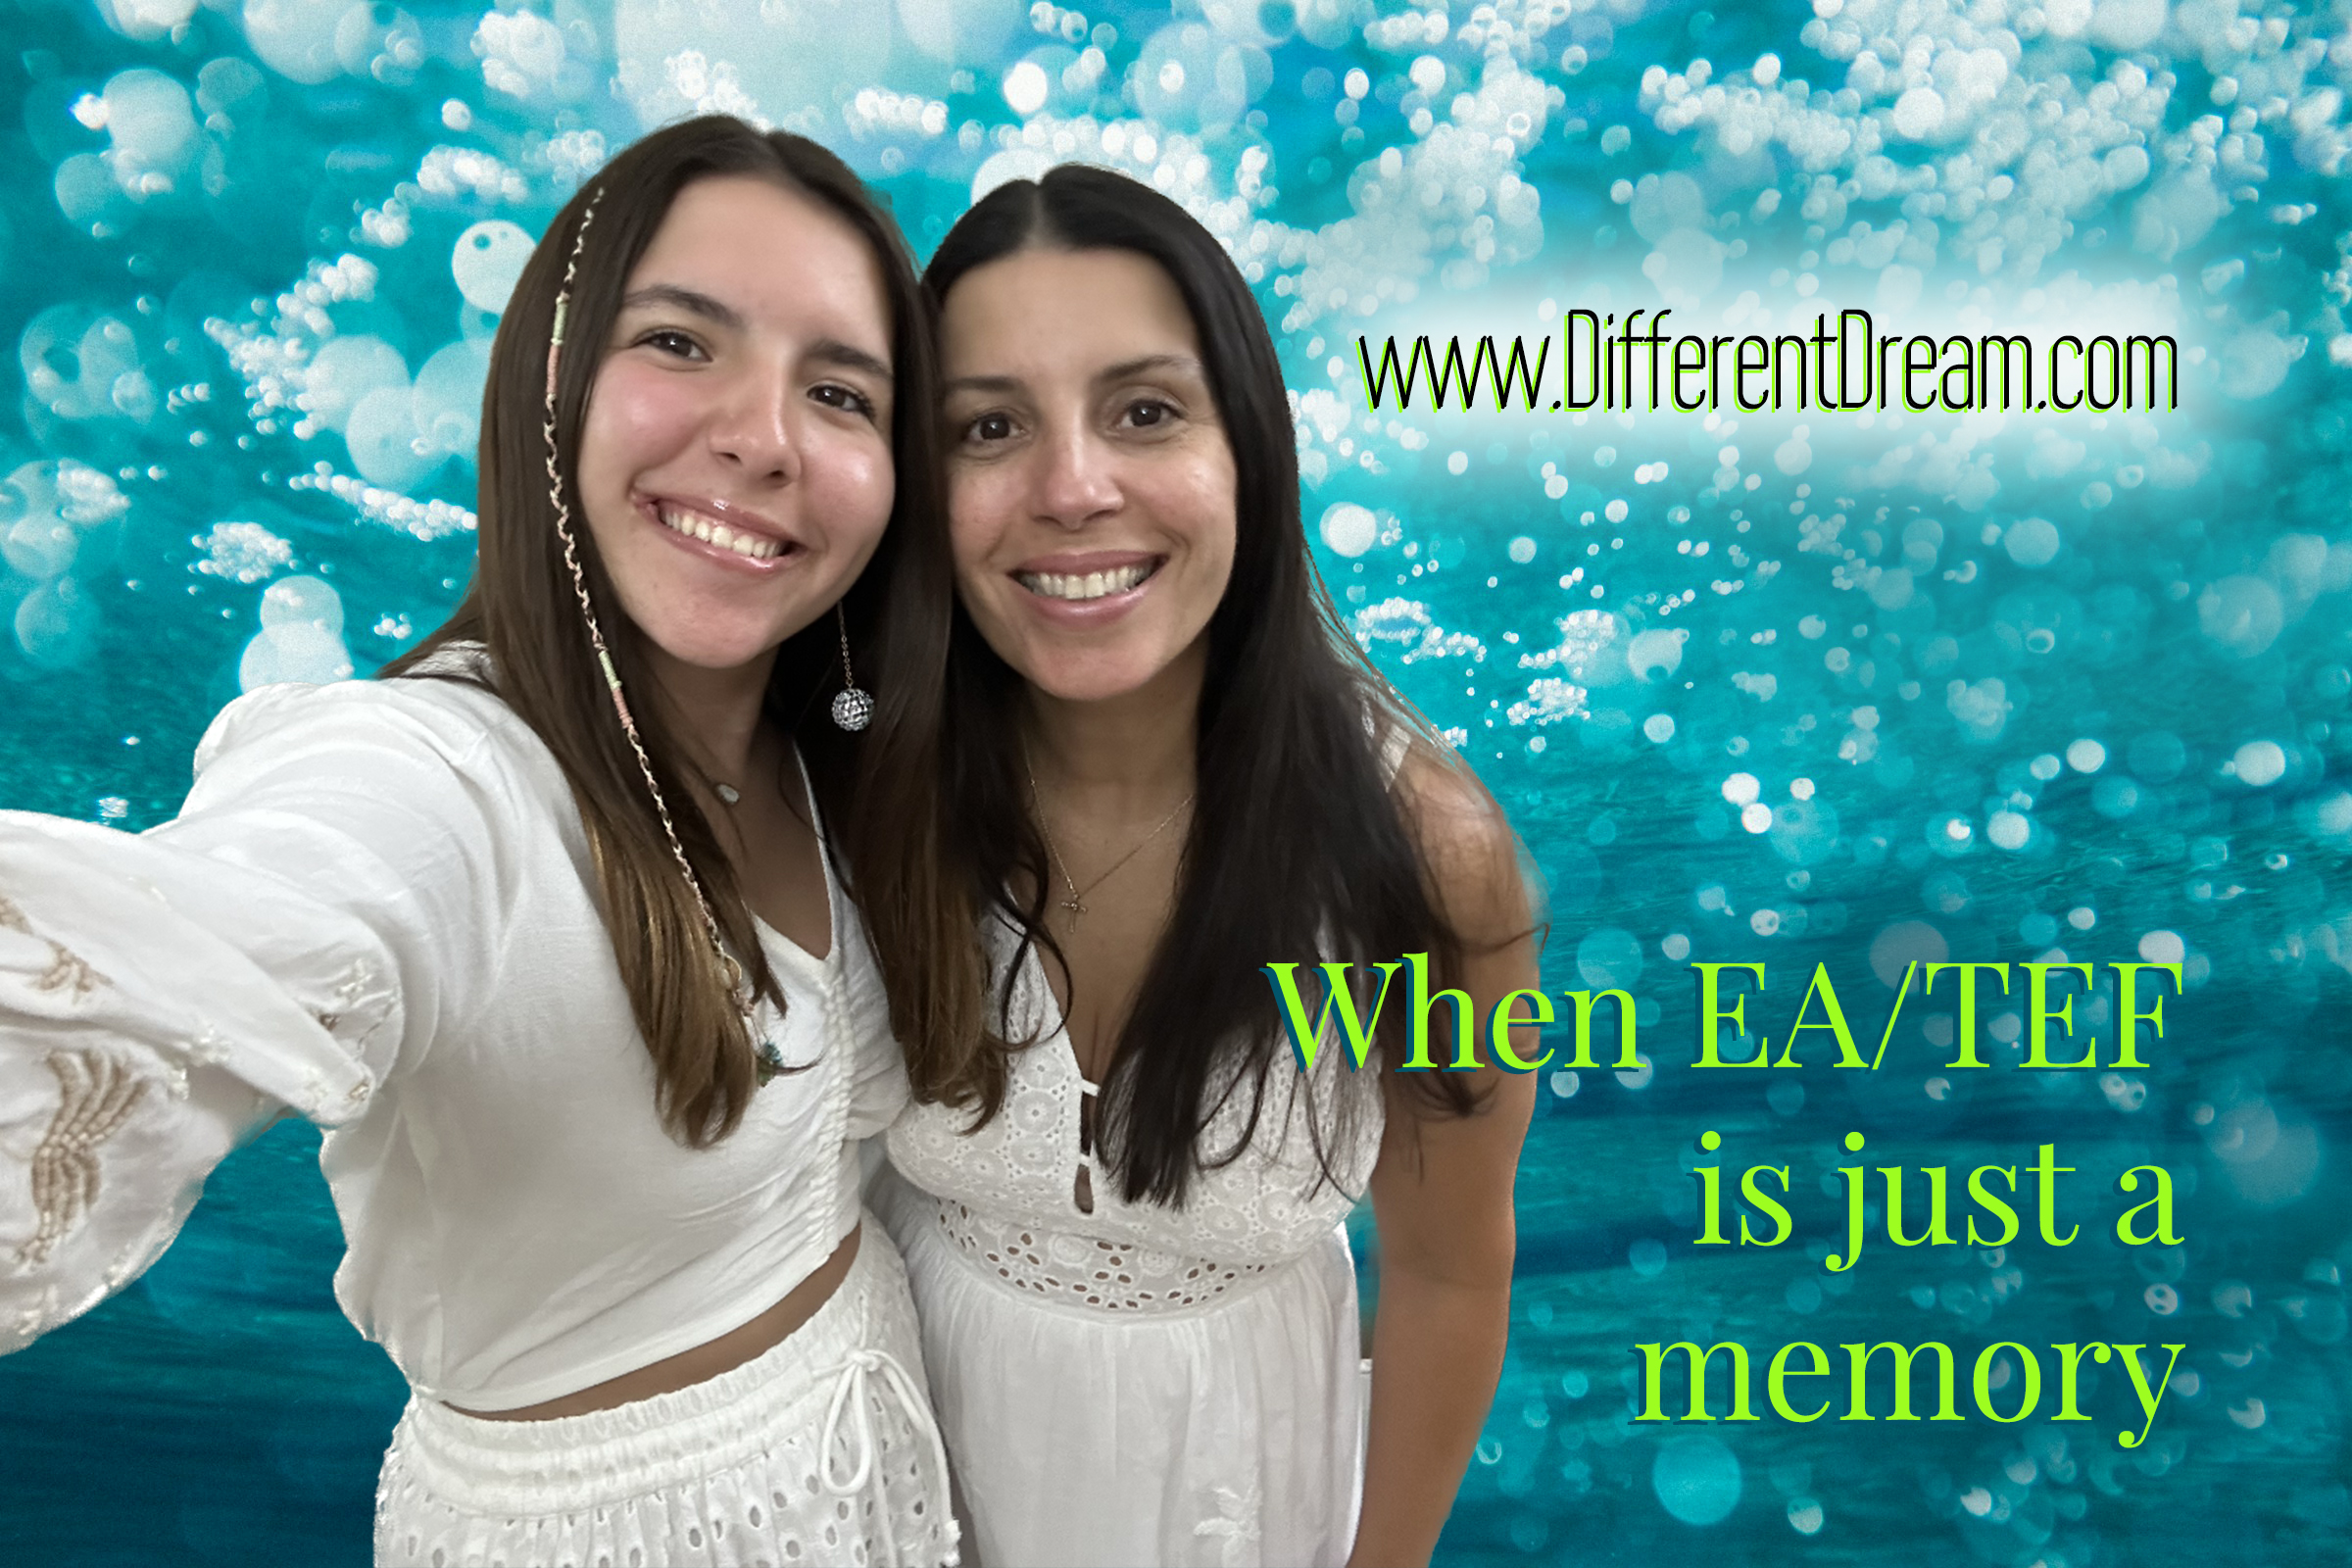 Valeria Conshafter highlights the differences between her story and her daughters in "What does my child remember about EA/TEF treatment?"